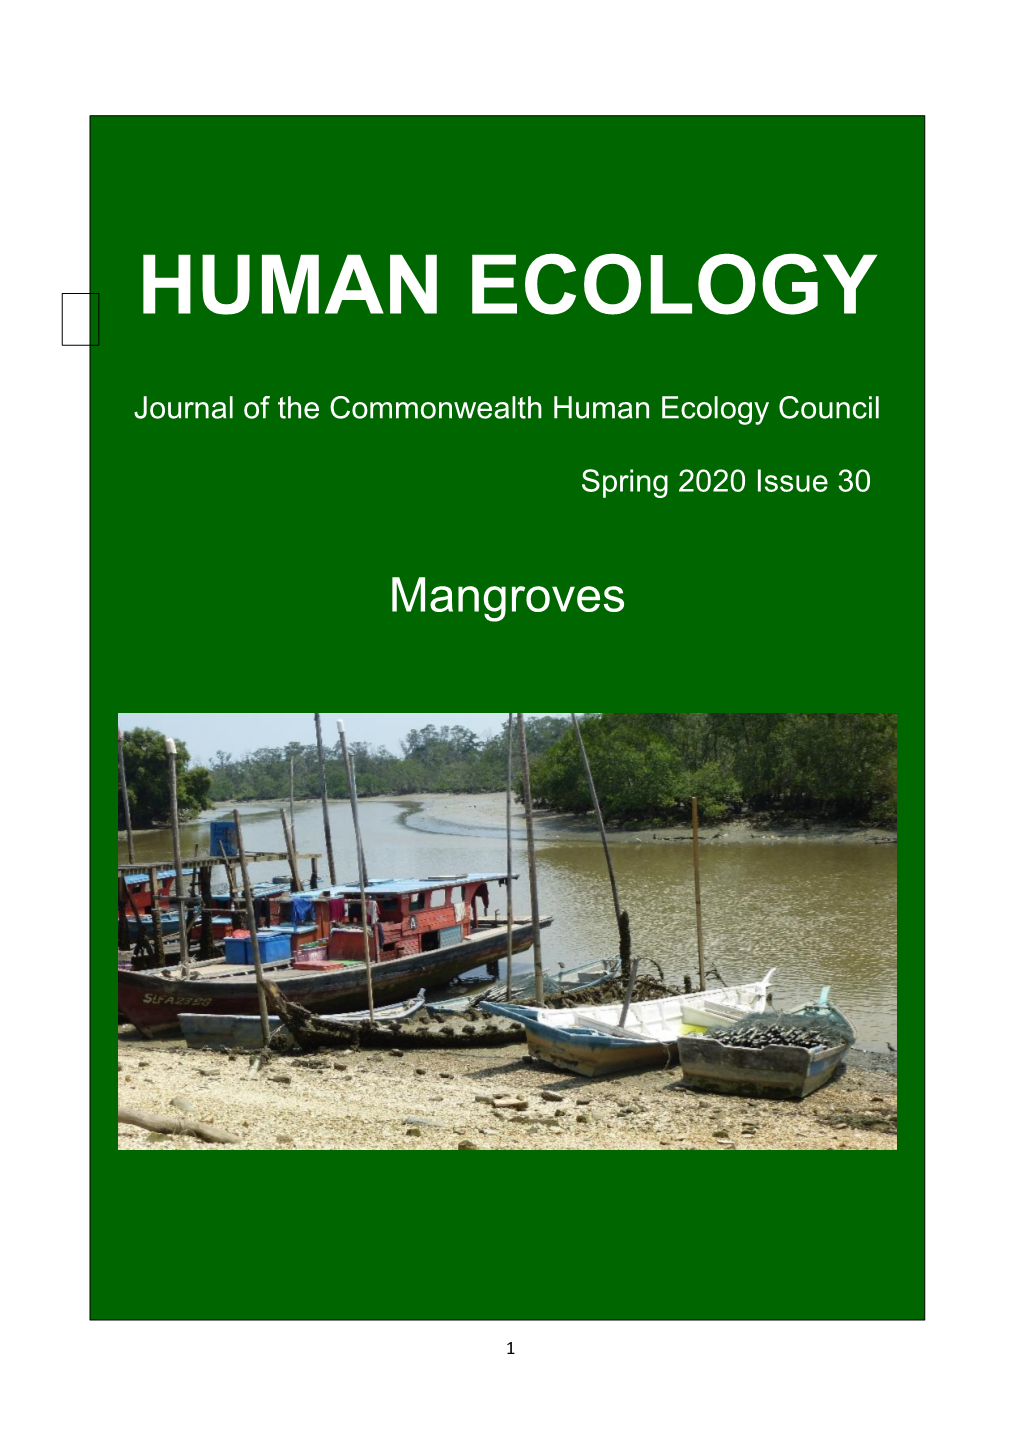 Mangrove Harbingers of Coastal Degradation Seen in Their Responses to Global 19 Climate Change Coupled with Ever-Increasing Human Pressures Norman C